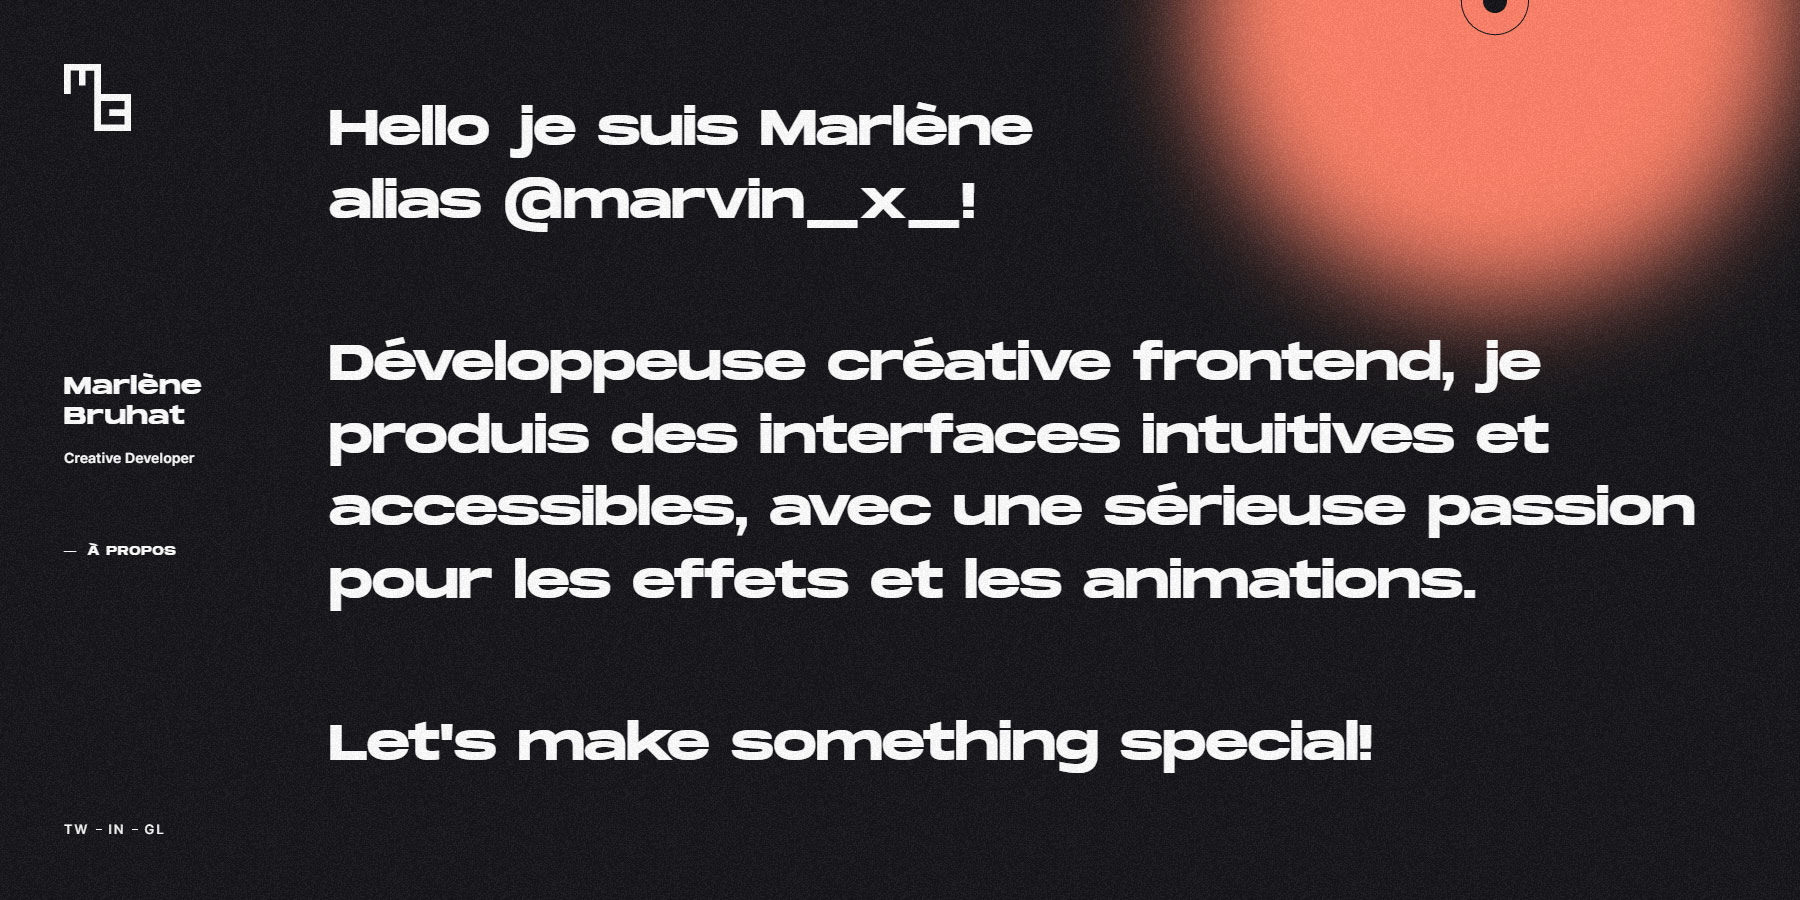 marvinx - Website of the Day